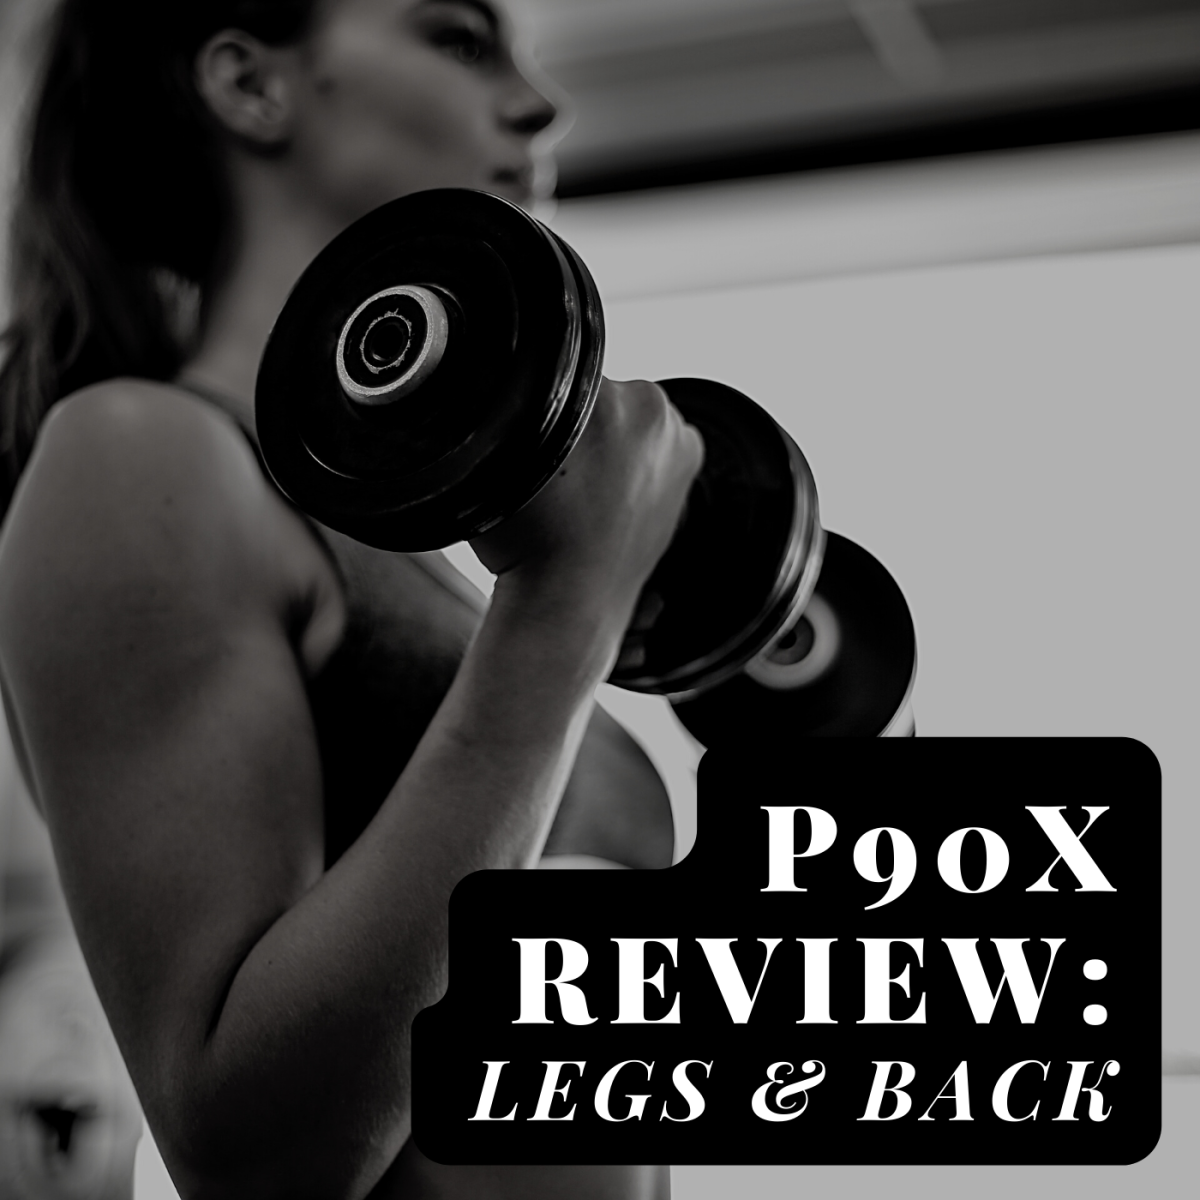 A thorough review of the P90X Legs & Back workout